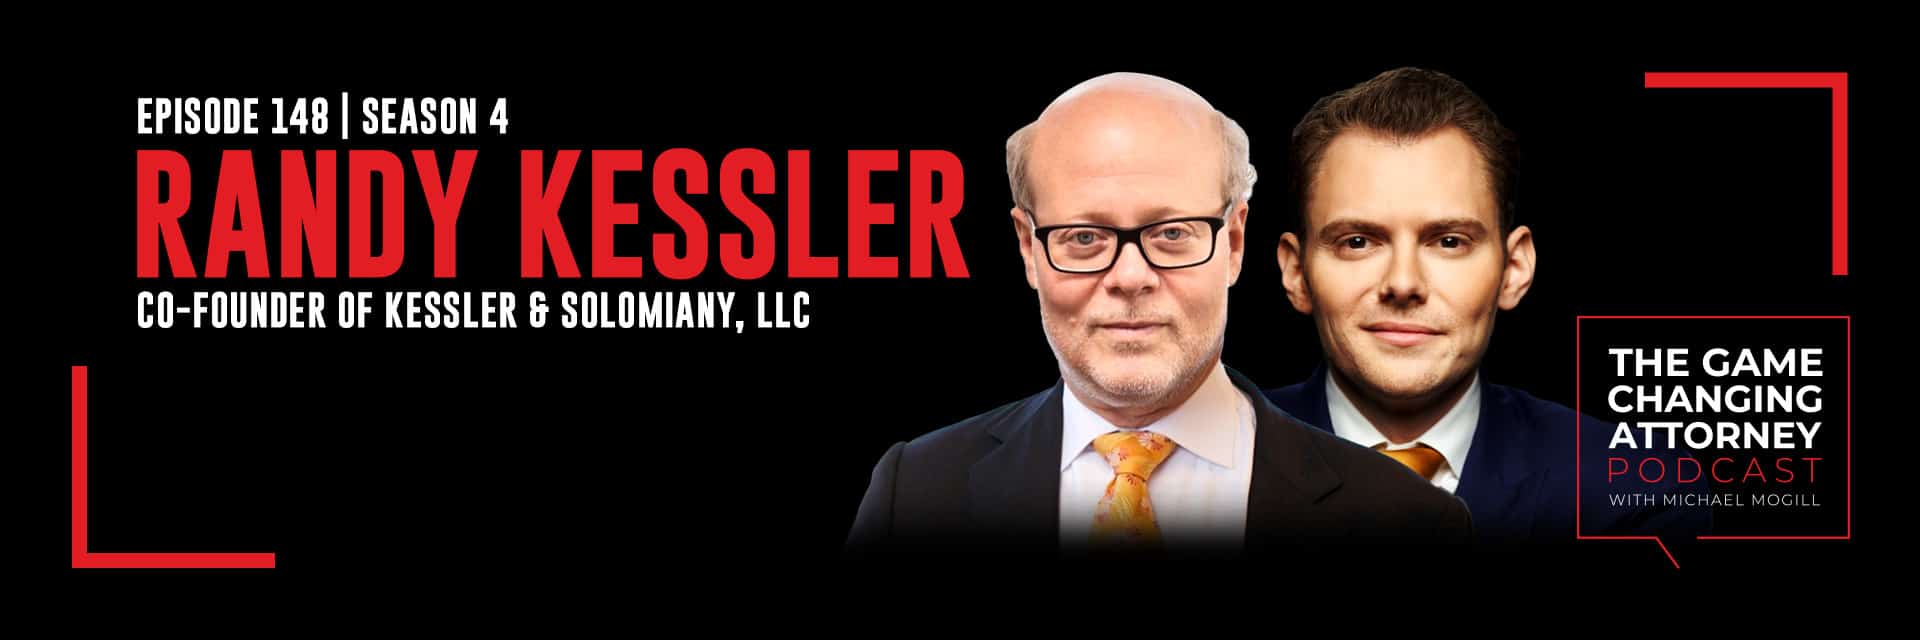 The Game Changing Attorney Podcast: Randy Kessler